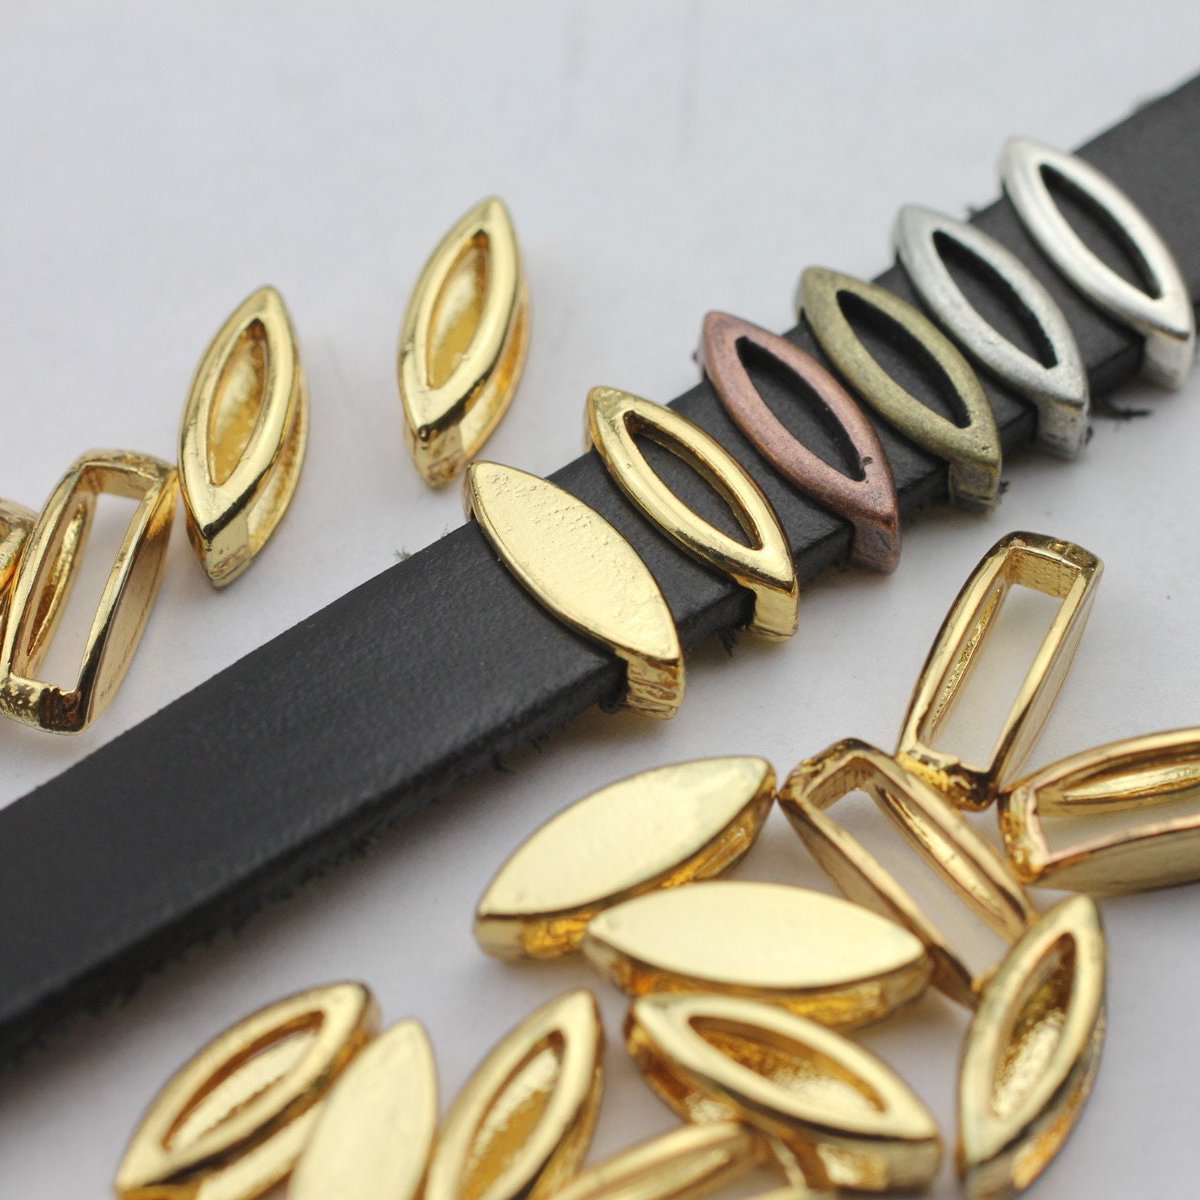 The latest addition to my #etsy shop: Gold Plated Beads, Slider Beads, Navette Beads, Flat Leather Beads, Bracelet Sliders, Cord Beads, Jewelry Accessories etsy.me/3TCUWAV #gold #christmas #beading #braceletconnectors #forbracelet #spacerbeads #magneticclasp #h